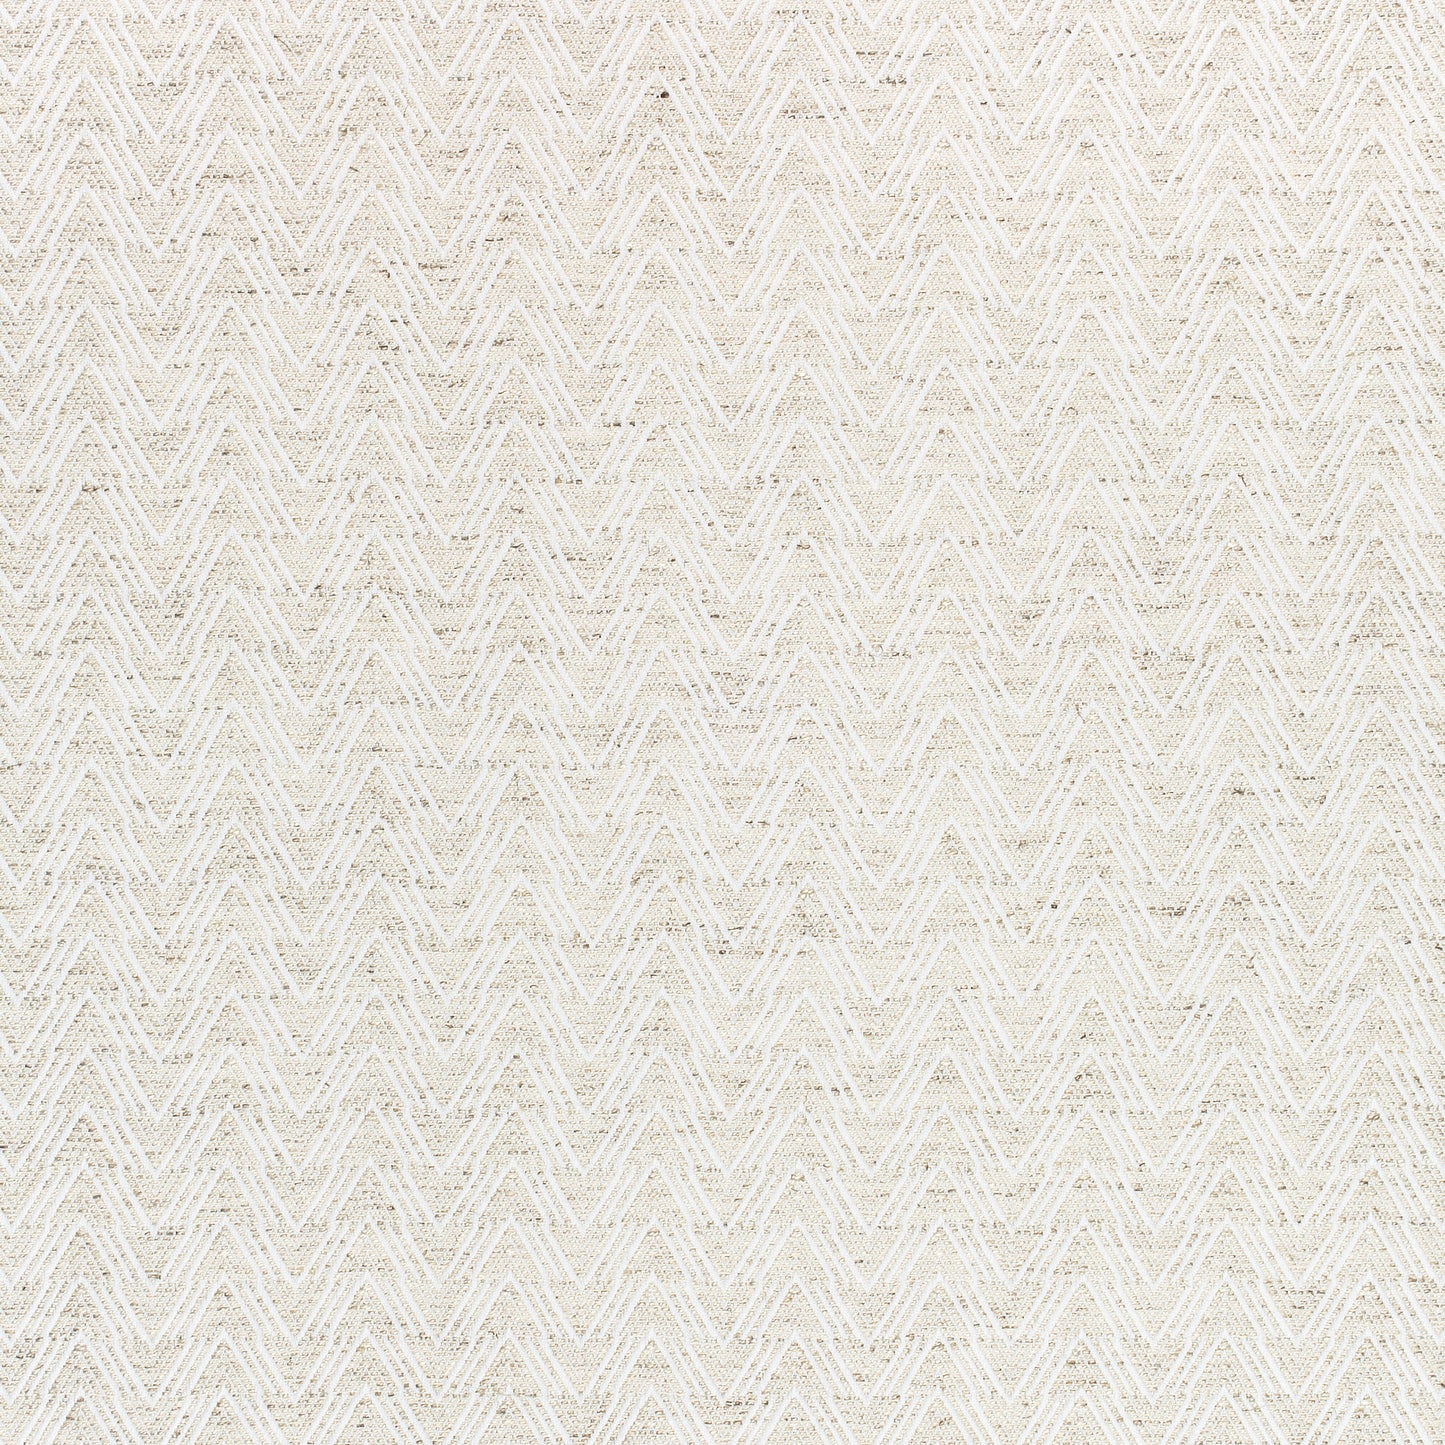 Purchase Thibaut Fabric Product W80647 pattern name Gatsby color Flax